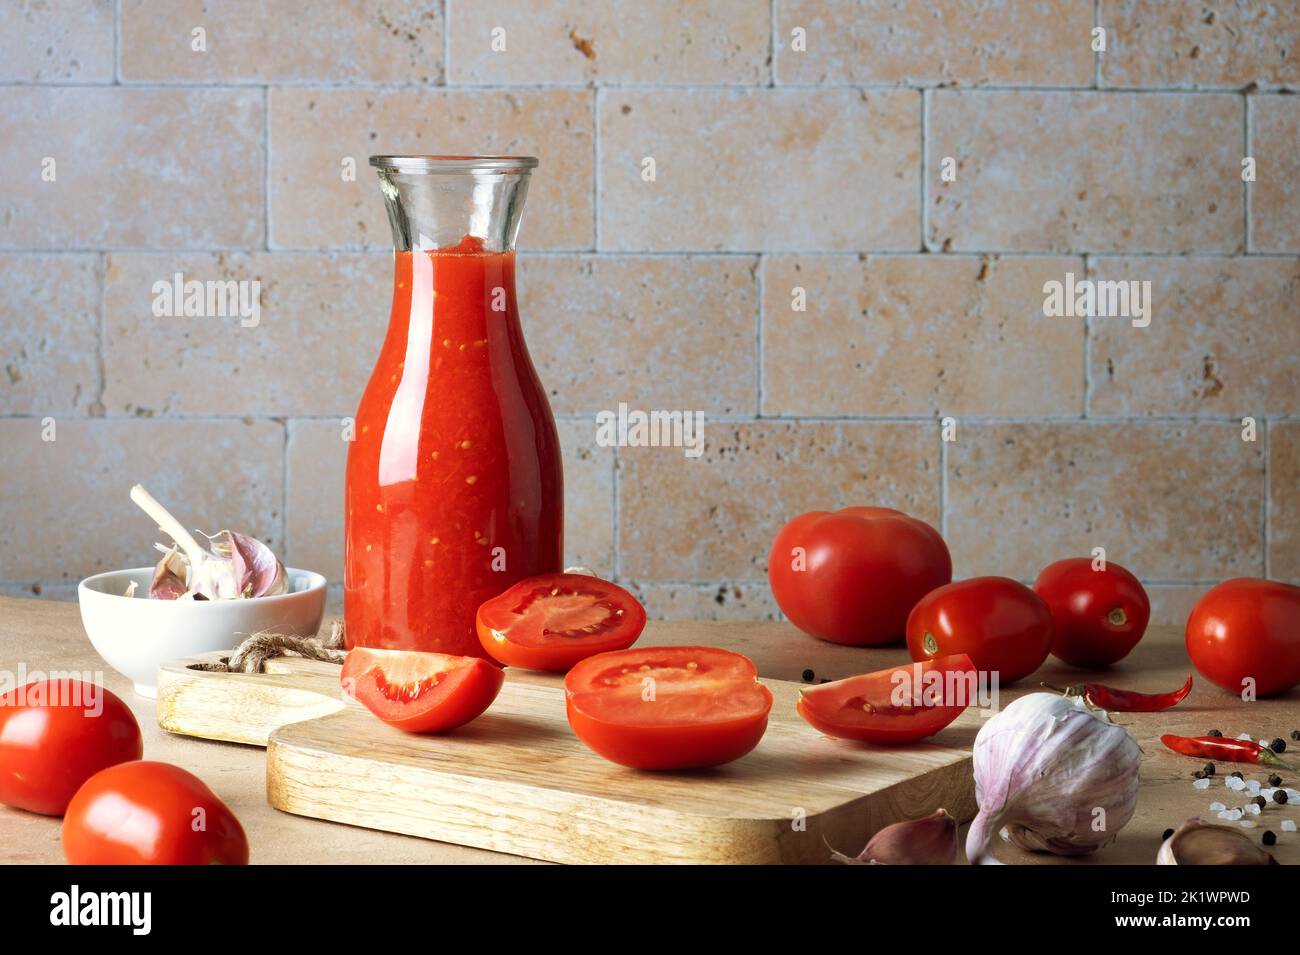 Ingredients for making homemade tomato sauce. Stock Photo